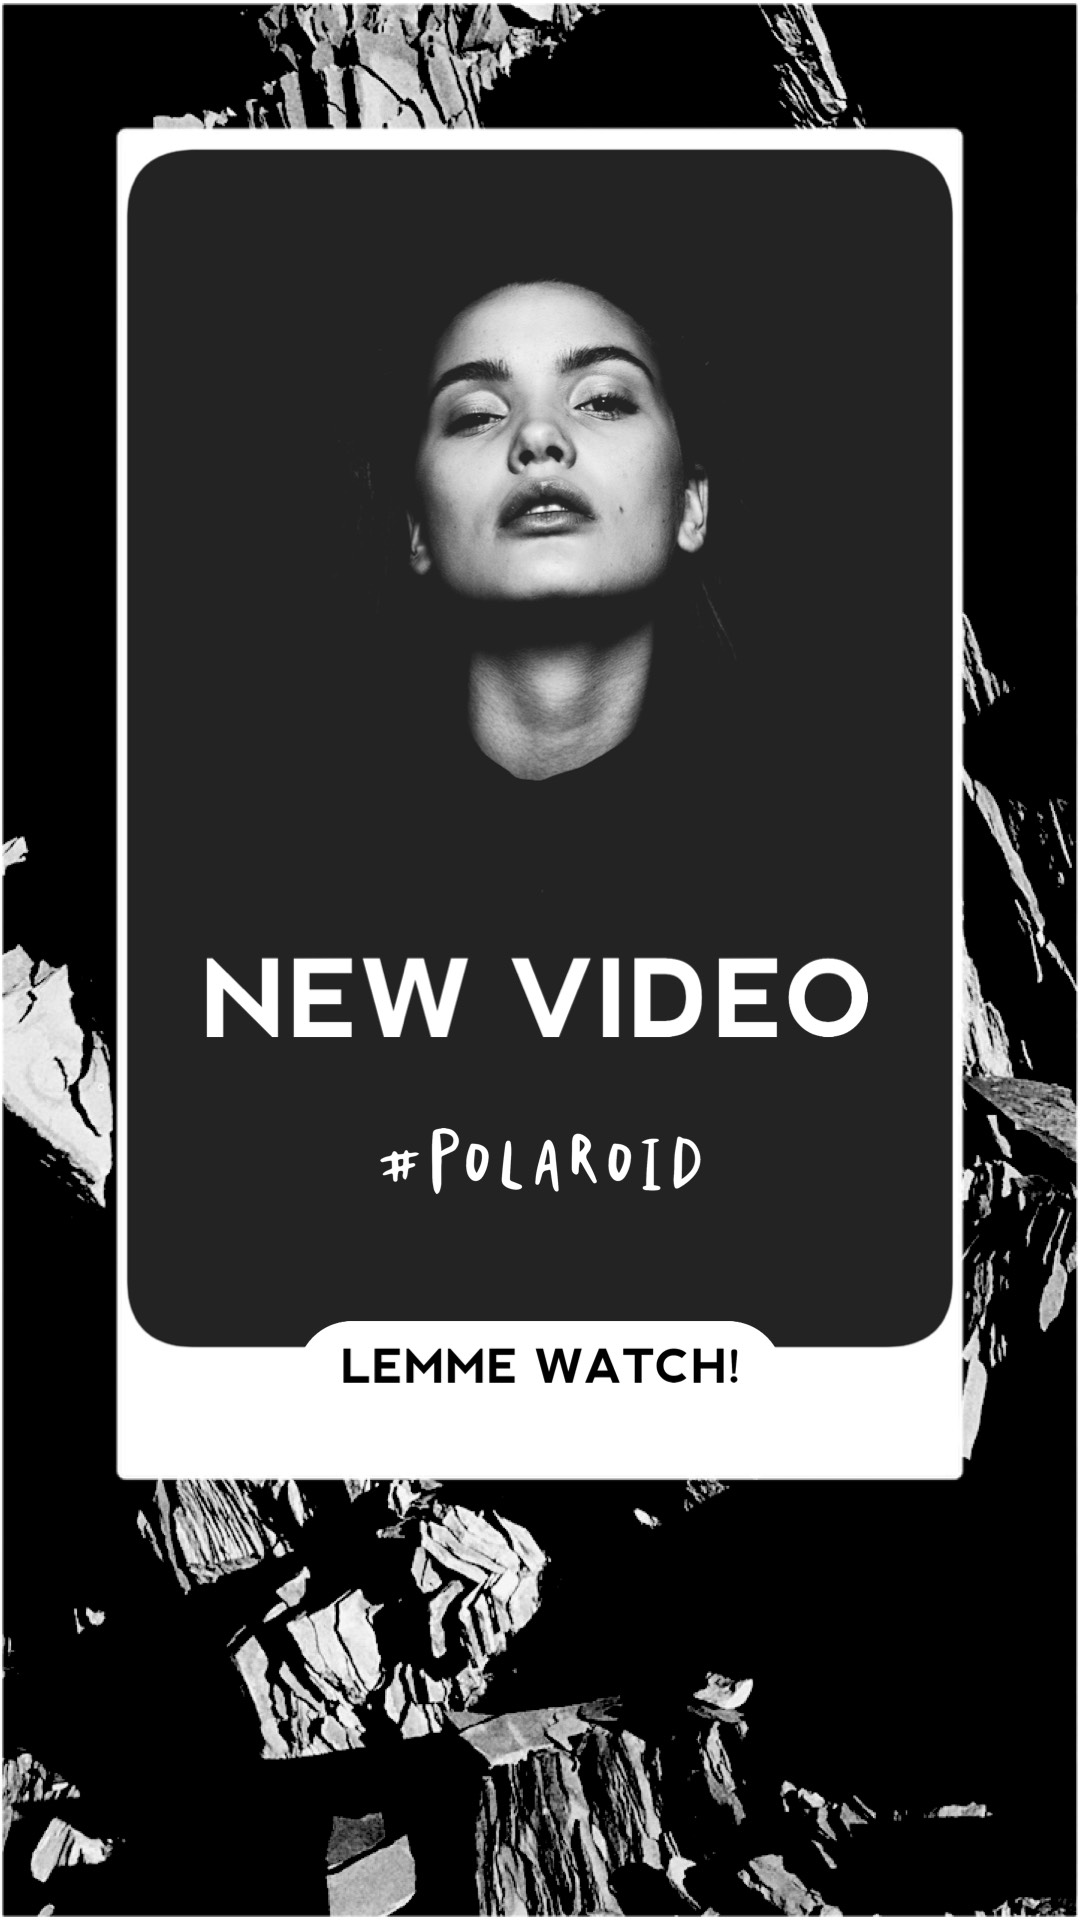 New Video Polaroid Lemme Watch! Black And White Template